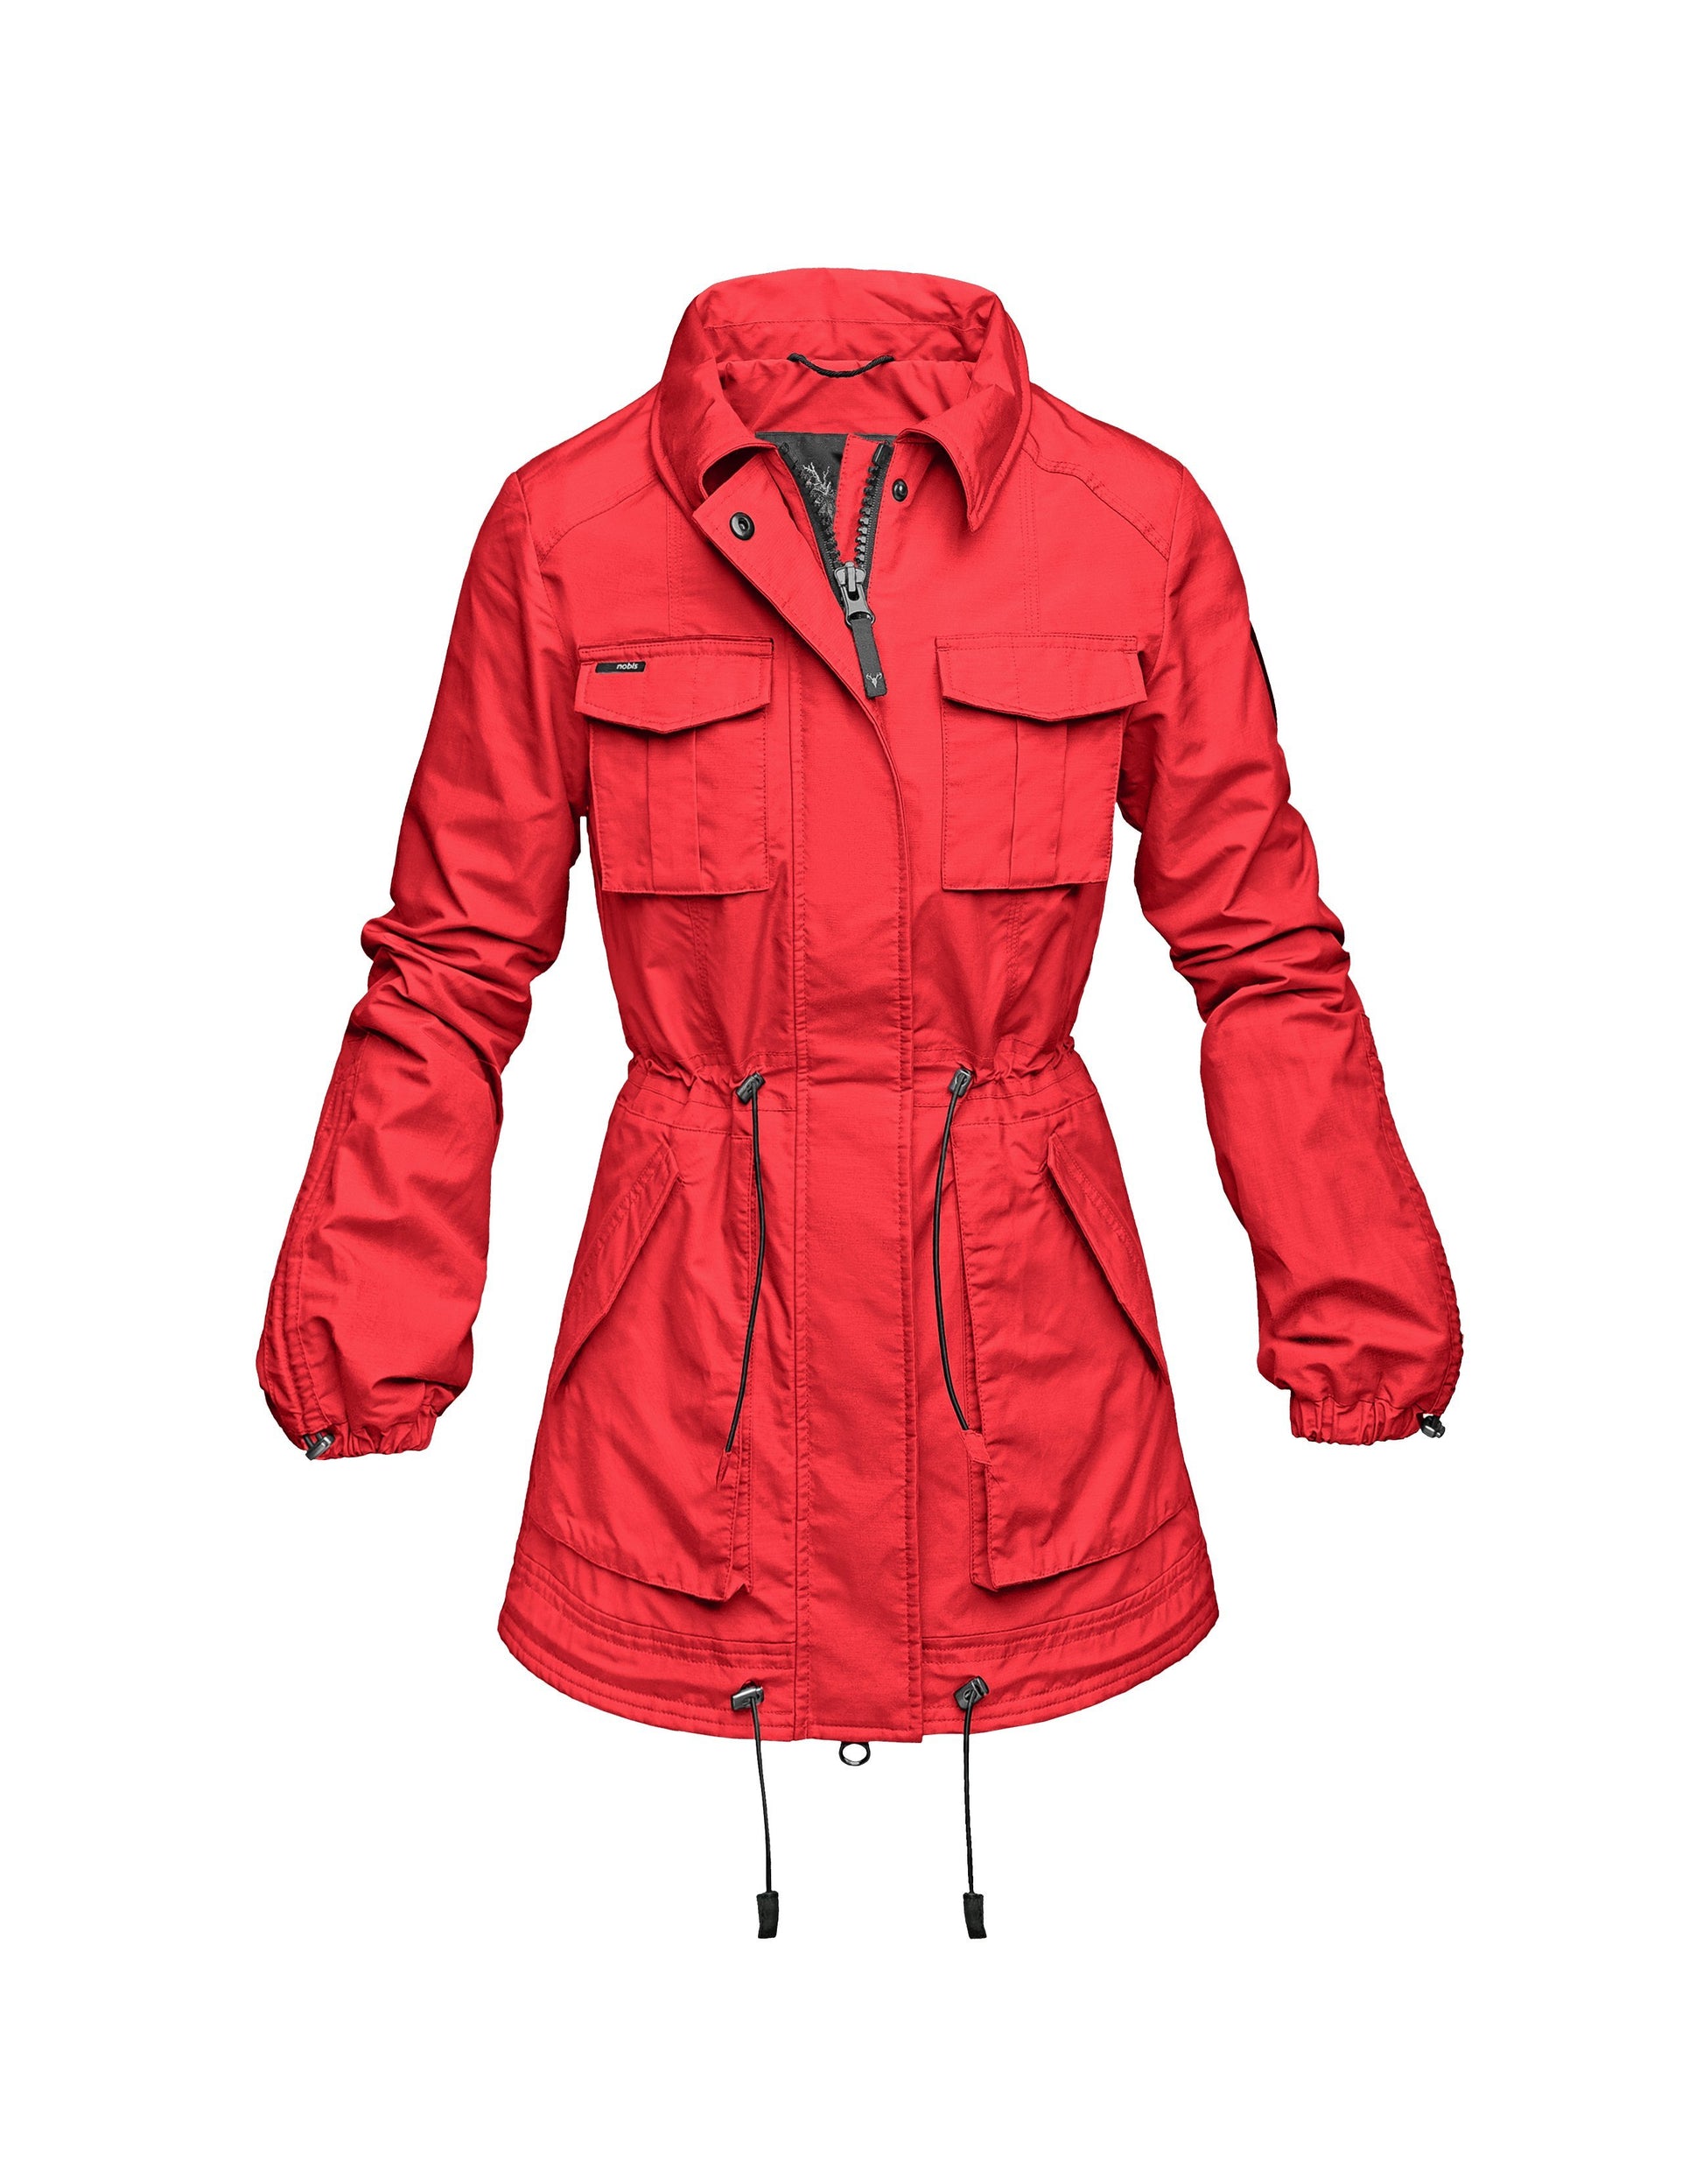 Women's hooded shirt jacket with four front pockets and adjustable waist in Red